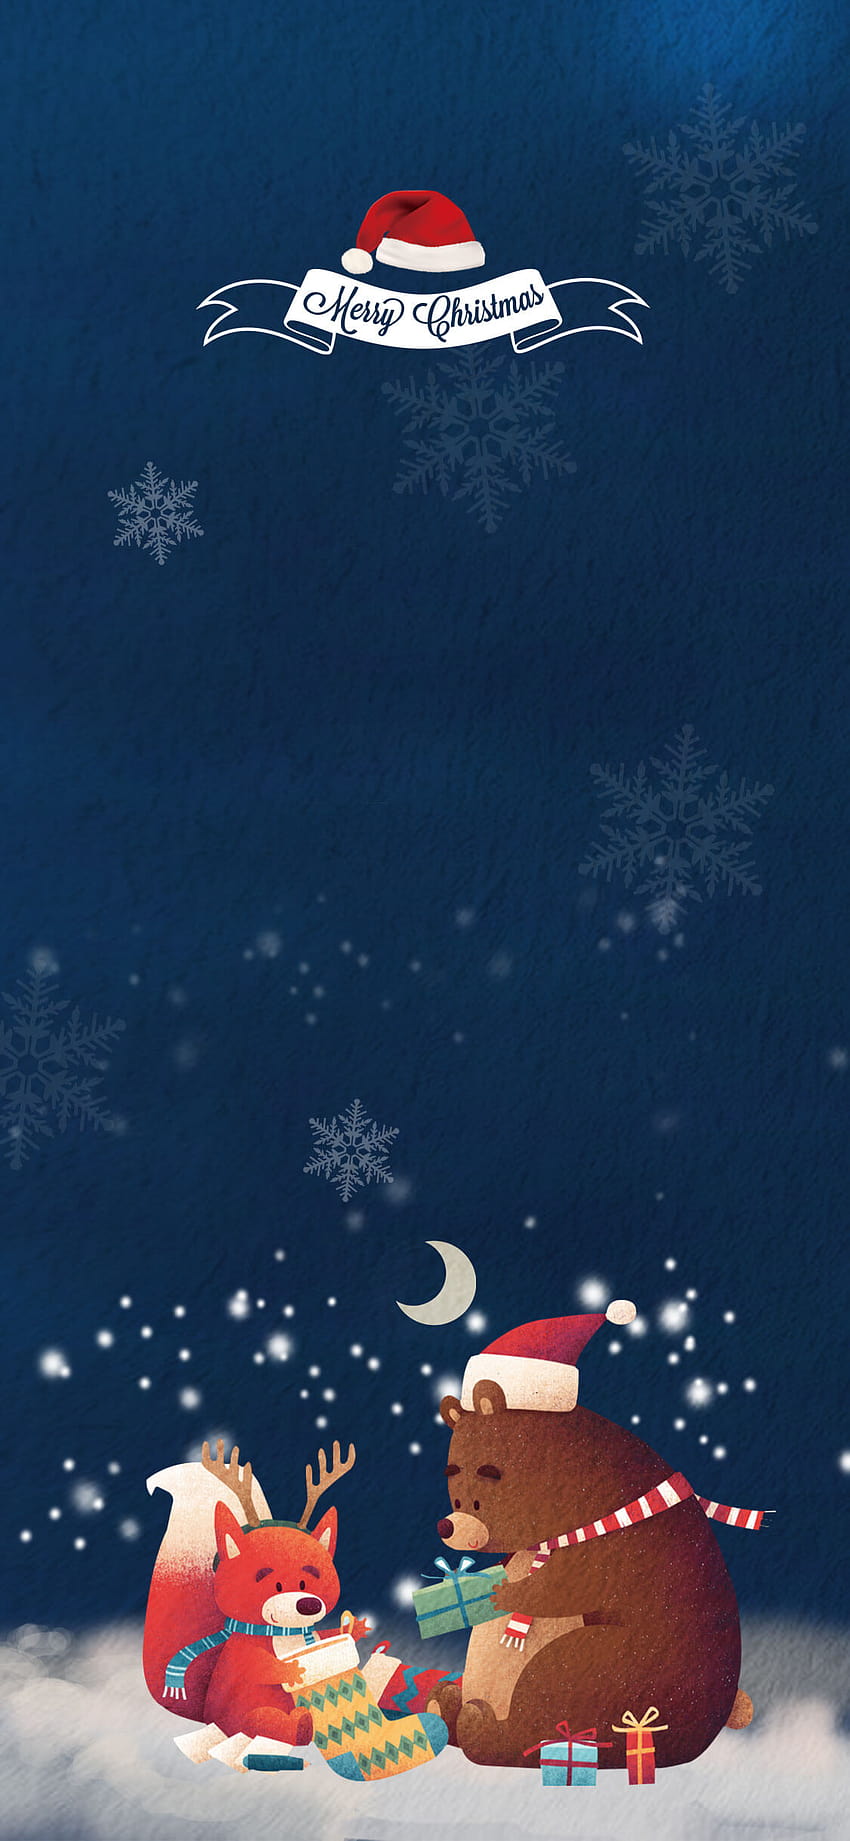 2021 Christmas for iPhone 6/7/8/SE/X/XS/XR/11/12, cute christmas presents HD phone wallpaper